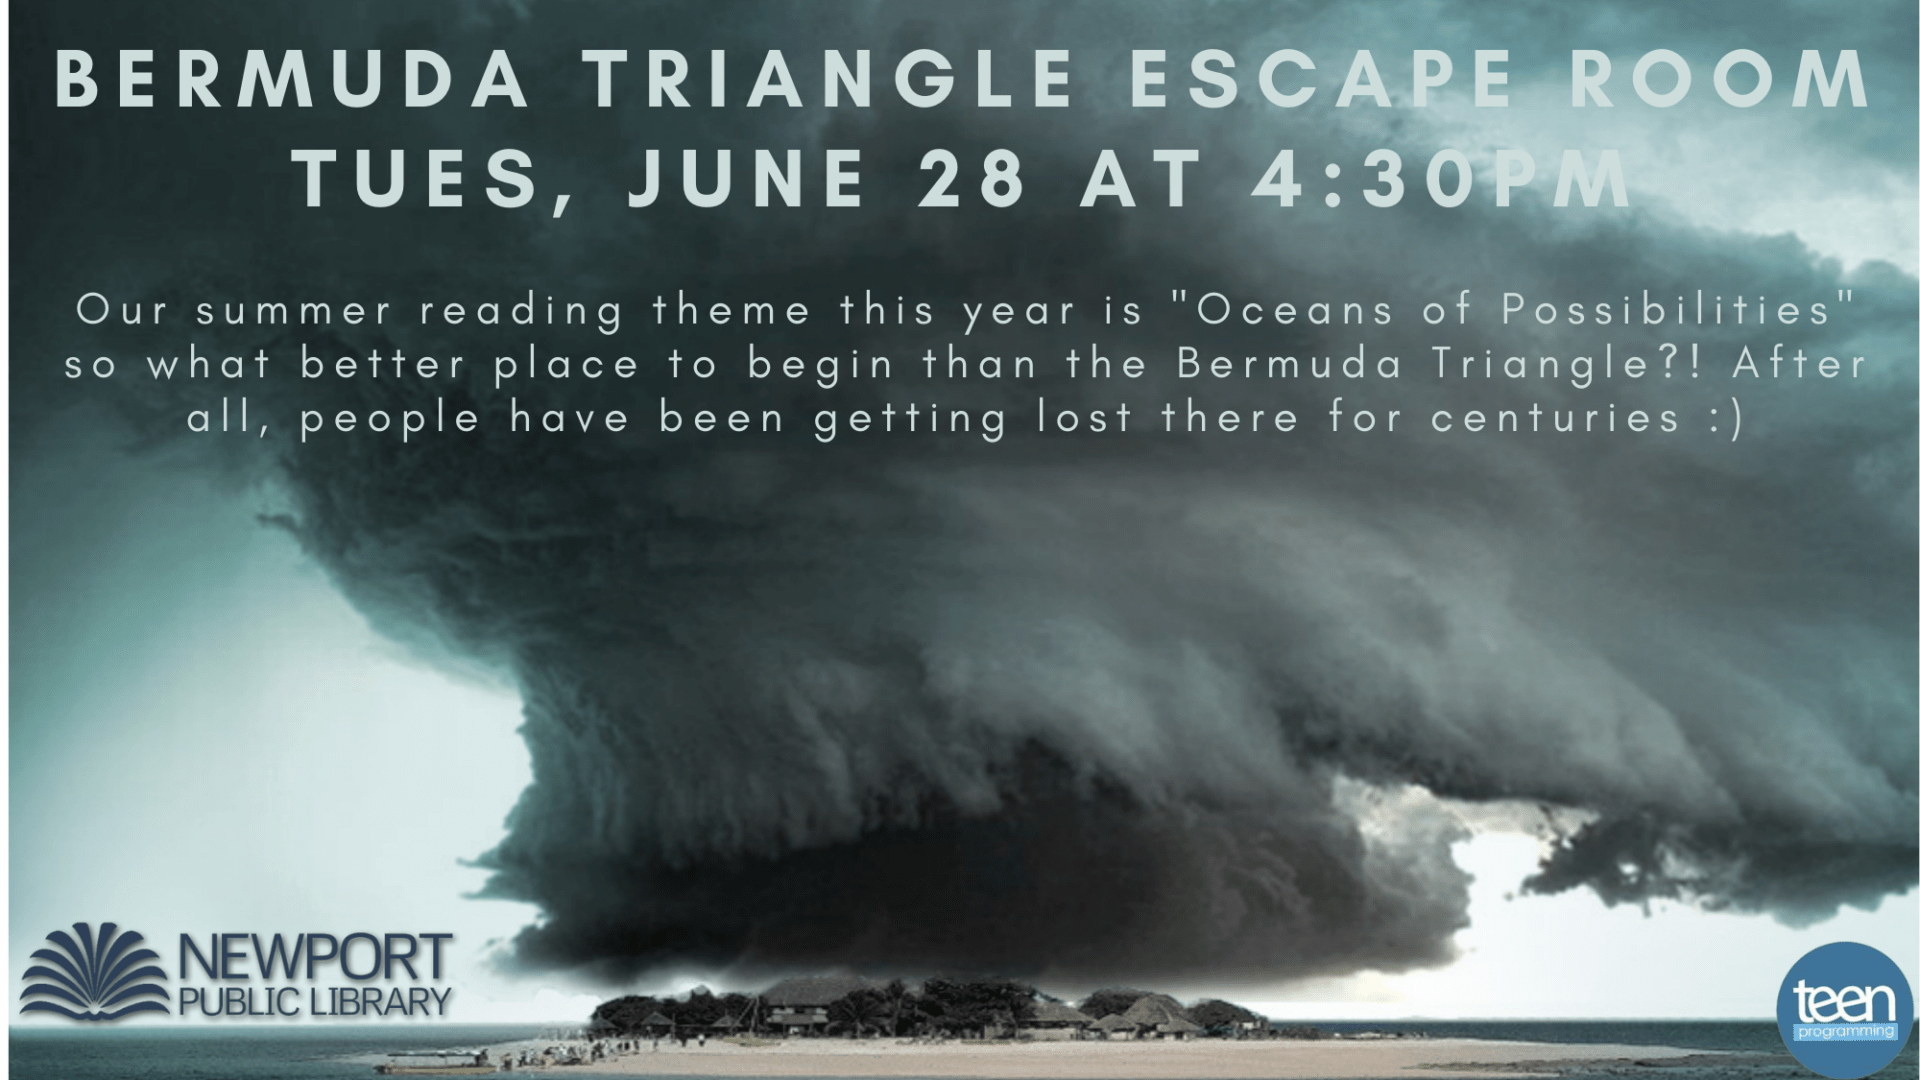 Get Lost (and maybe found) in the Bermuda Triangle – Tuesday, June 28 @ 4:30pm